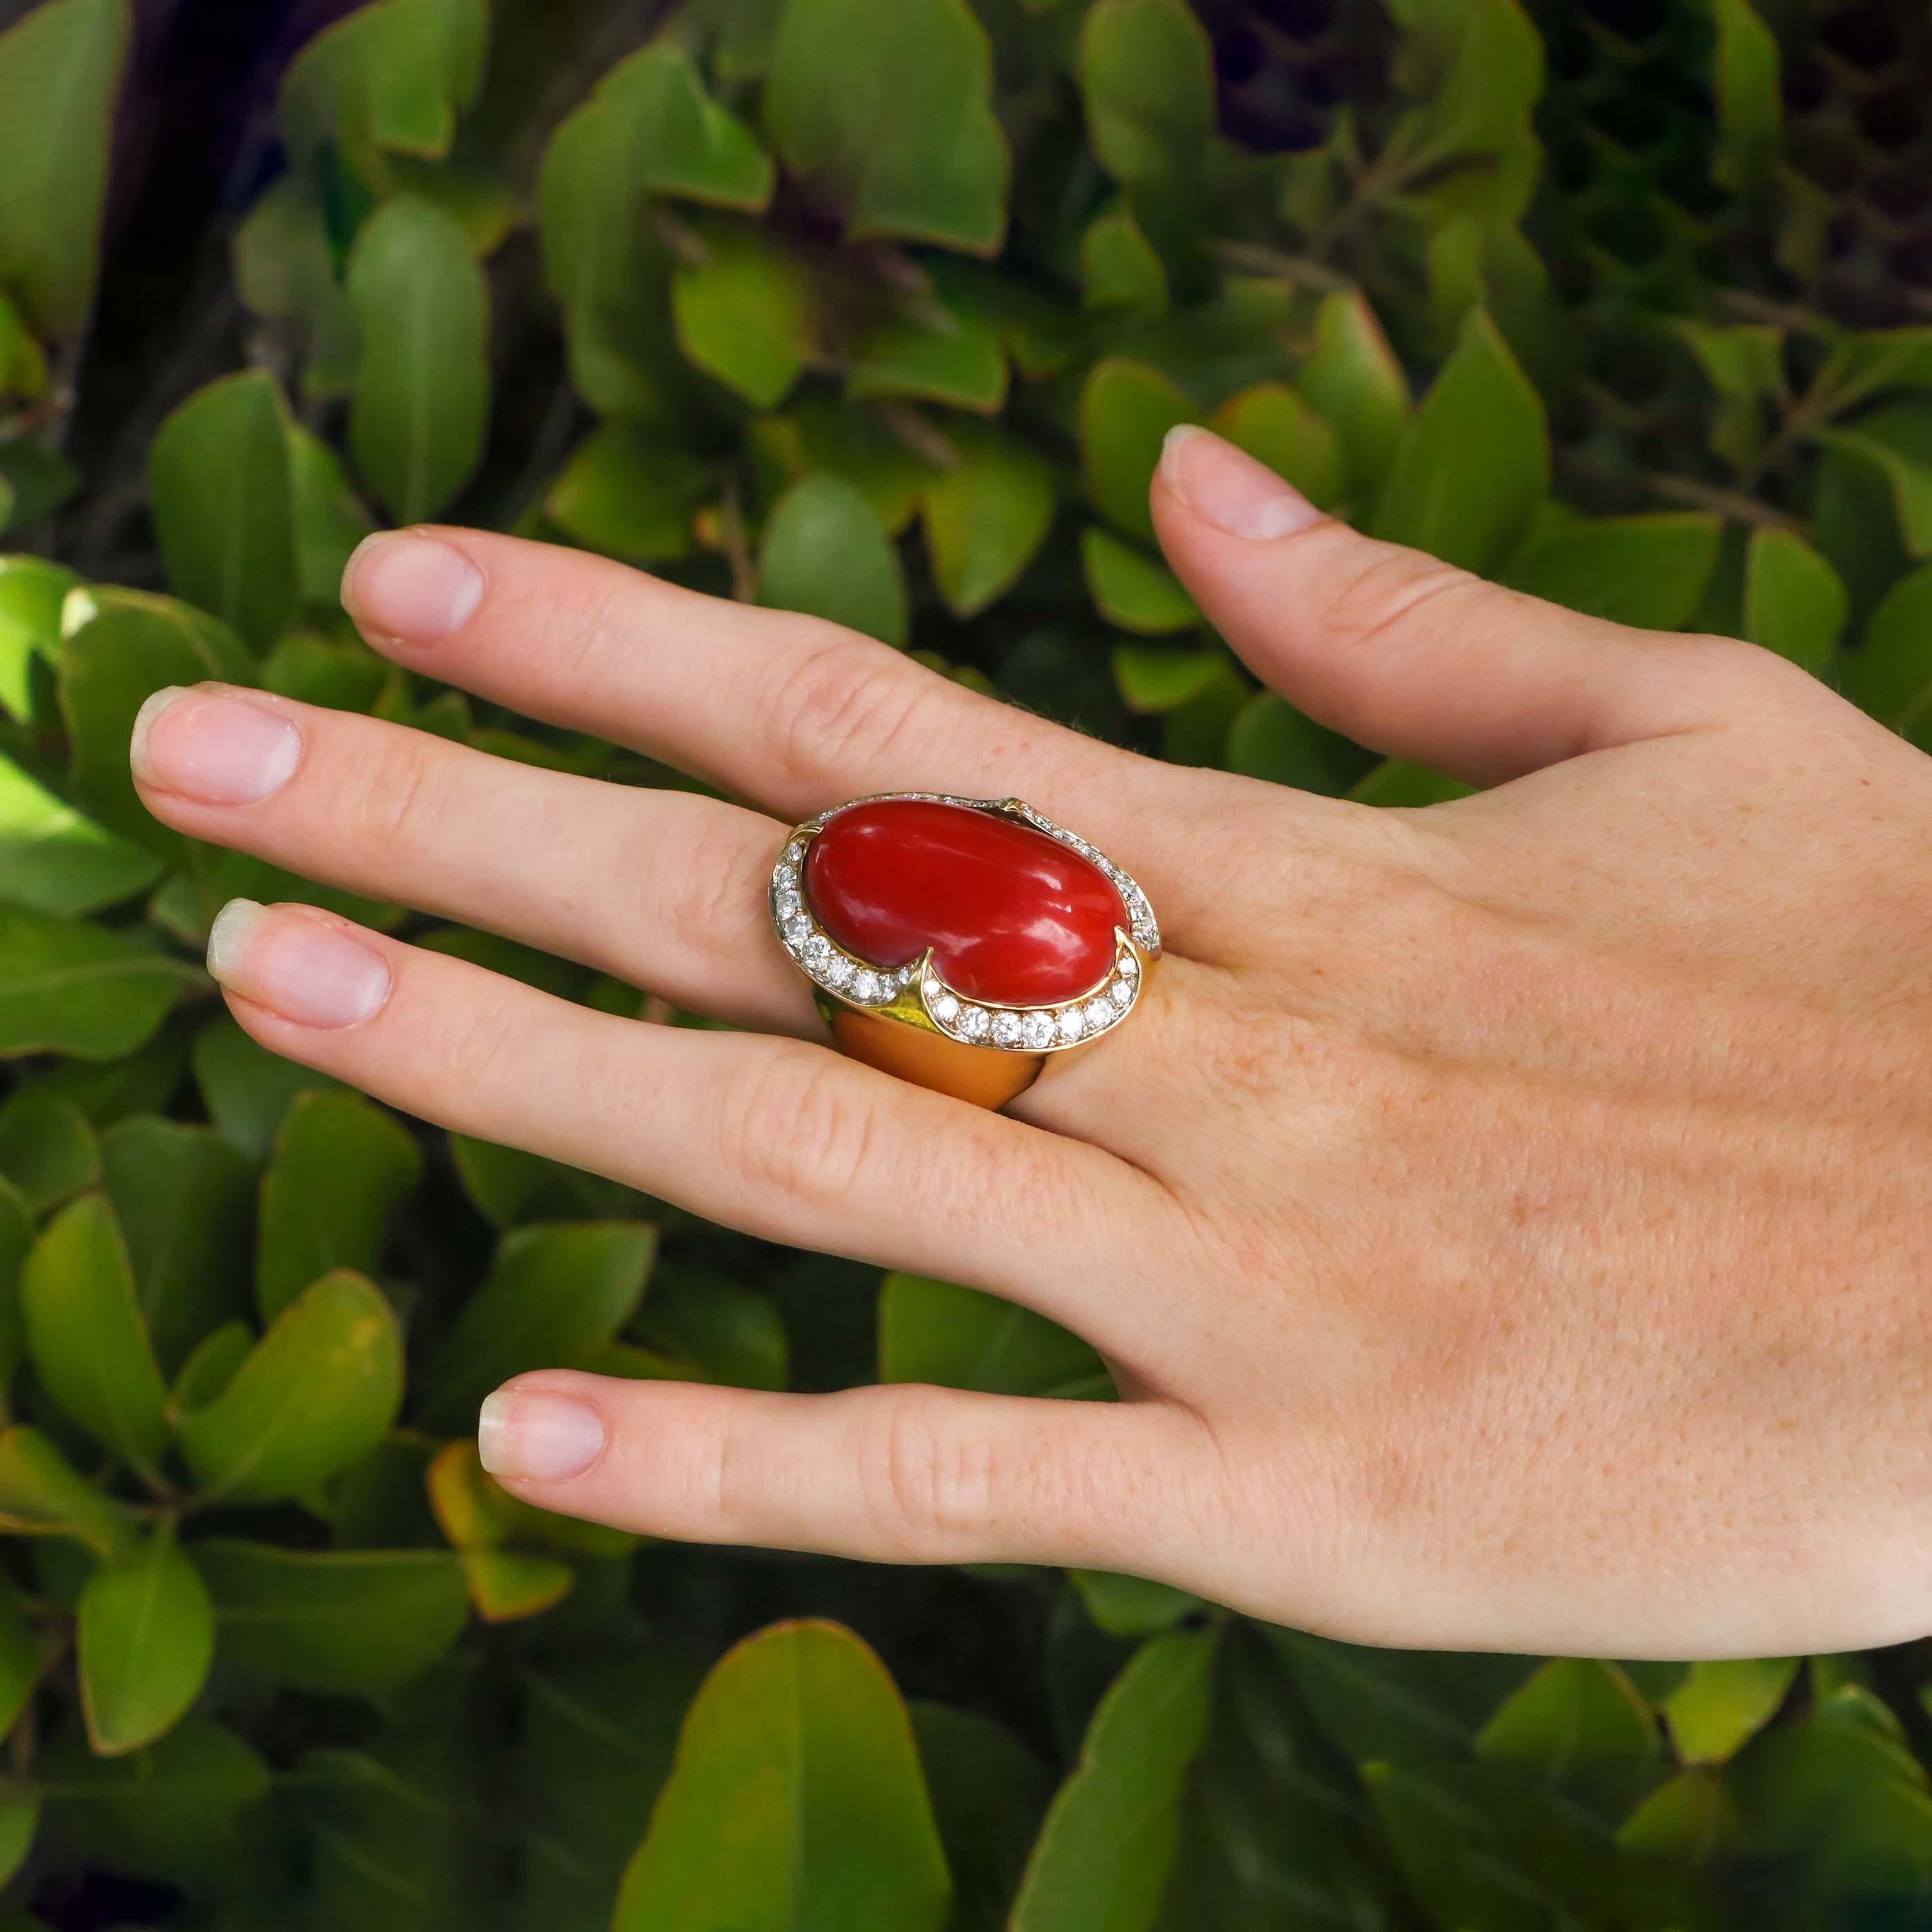 Coming from an eccentric estate in Chicago. This ring presents a bold rare ox blood coral at its center, with four gold prongs. This rings coral is surrounded with hand-set white diamonds, each diamond sparkles brightly creating a center stage for